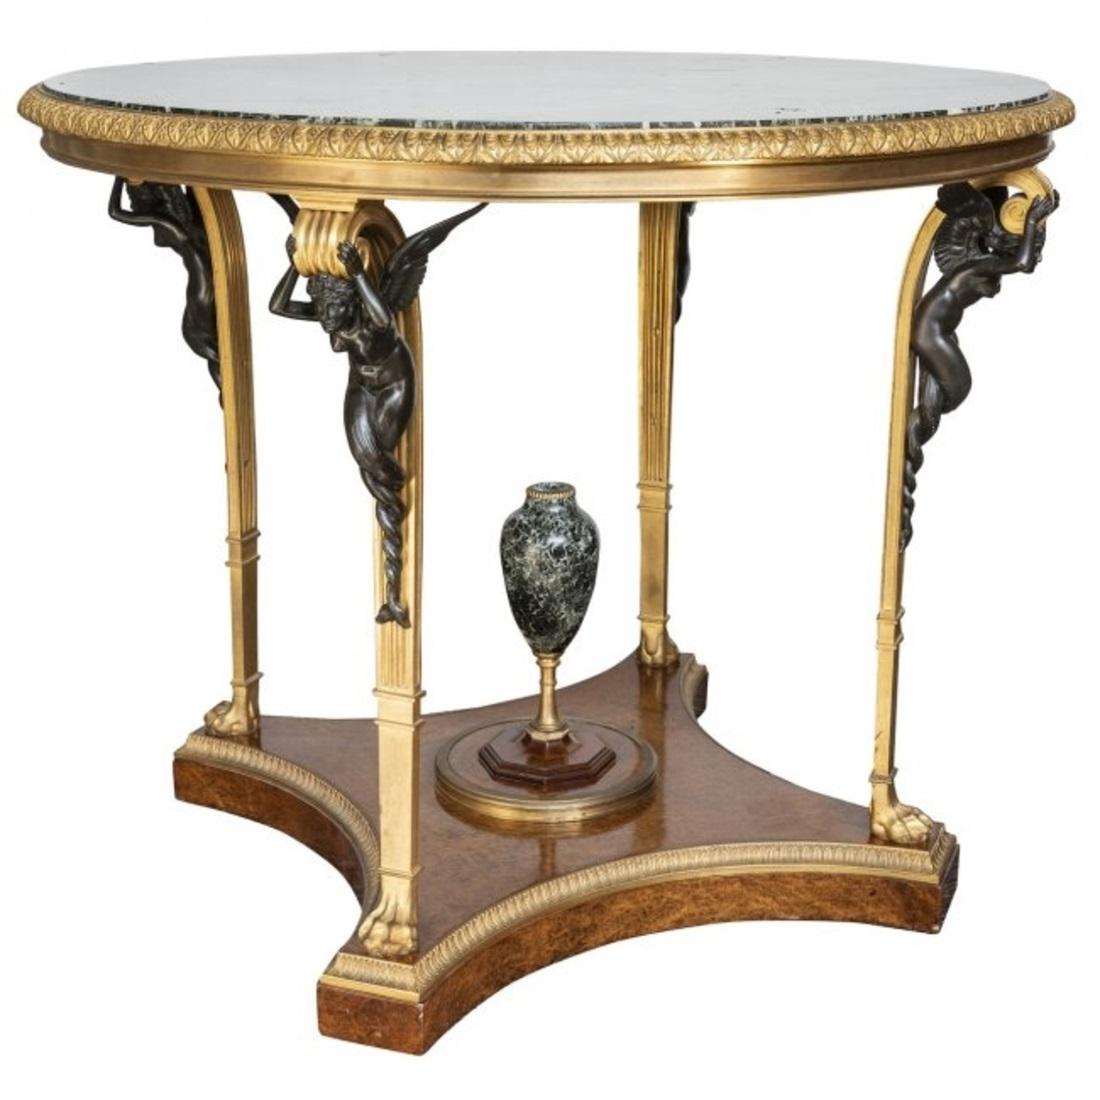 Charles X style bronze mounted Verde antique marble and aboyna wood large gueridon, circa 1900, the base stamped CF and MCF, the rim with a leaf cast frieze, with fluted supports cast in bronze and headed by nautical winged female sphinxes, raised